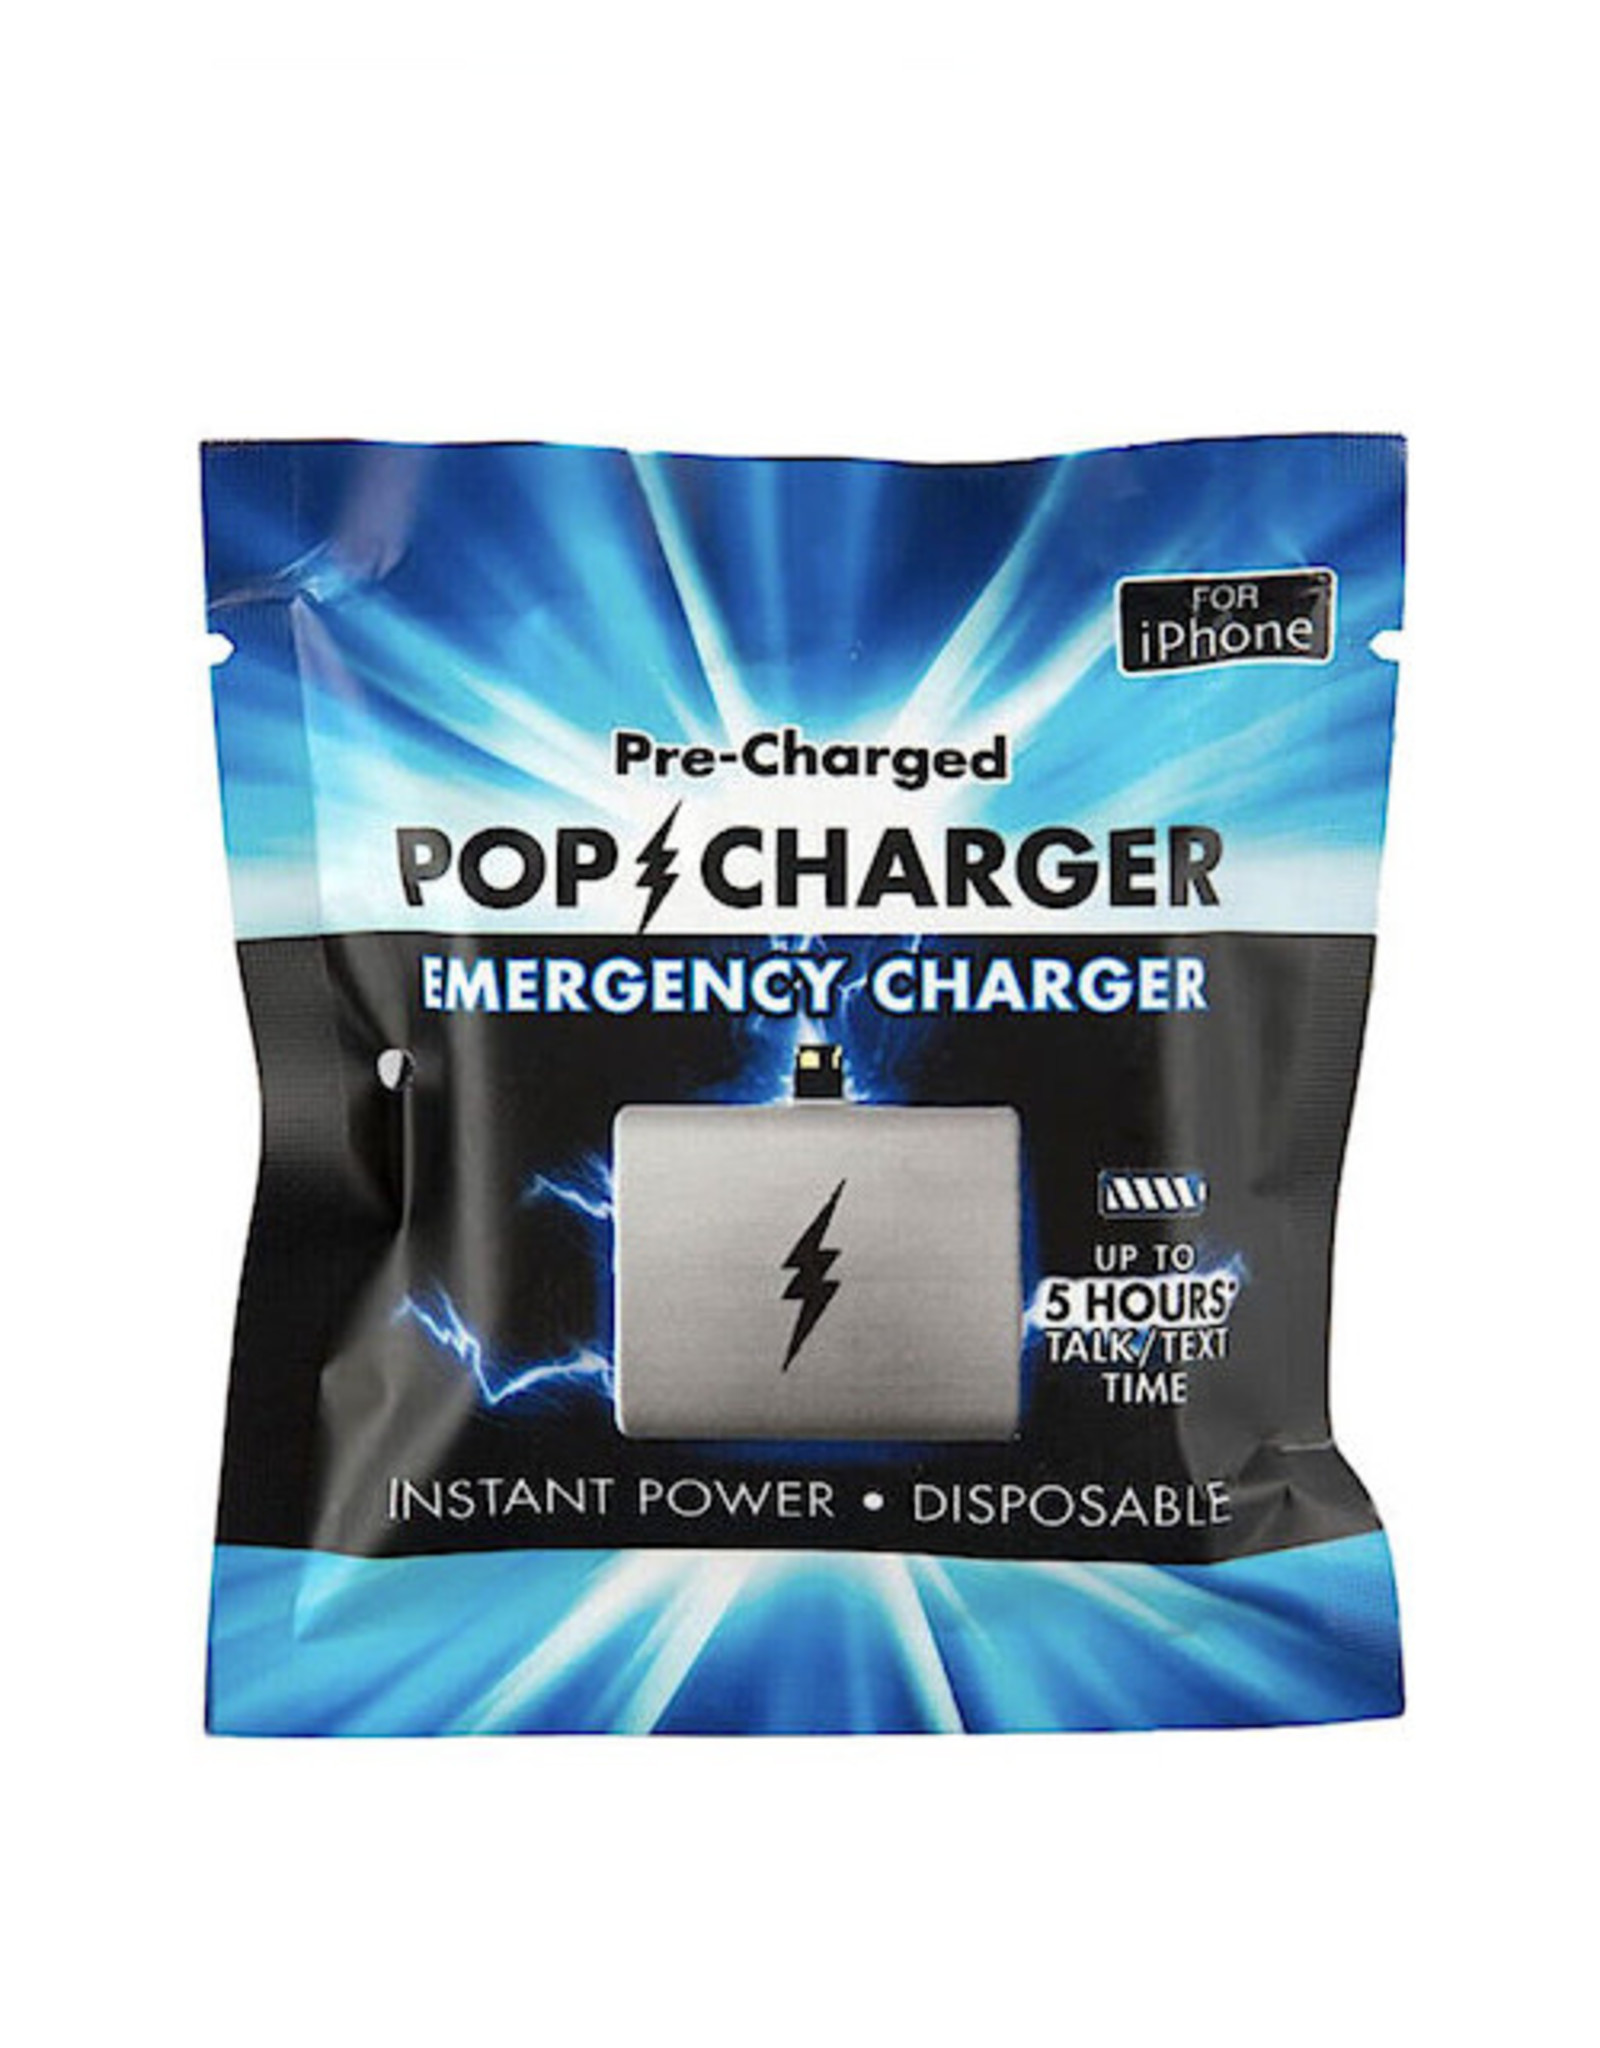 Pop Charger